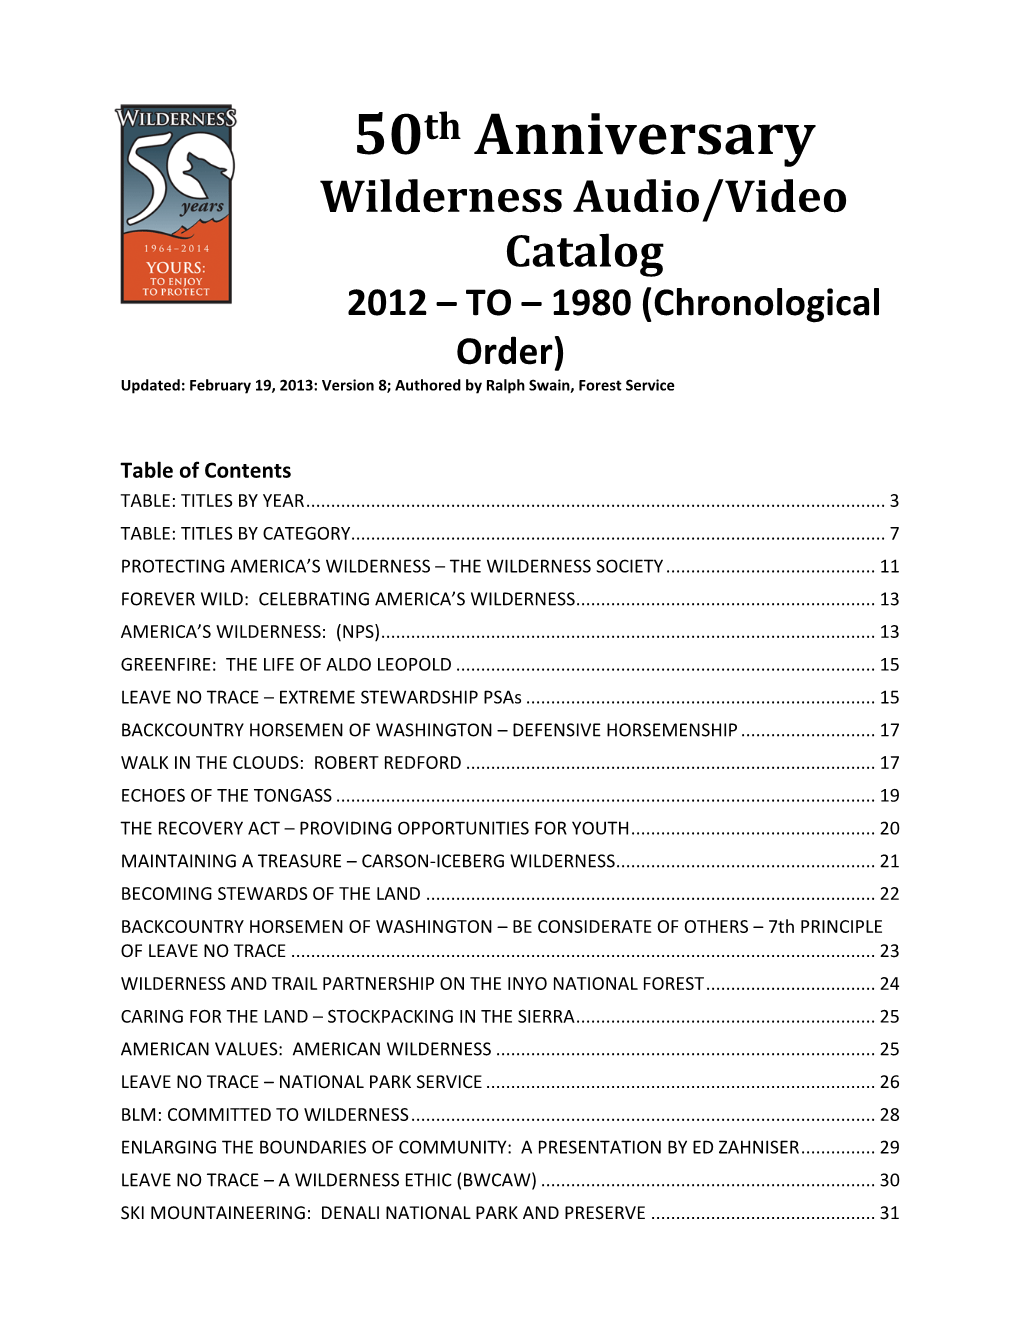 50Th Anniversary of the Wilderness Act Audio/Video Catalog